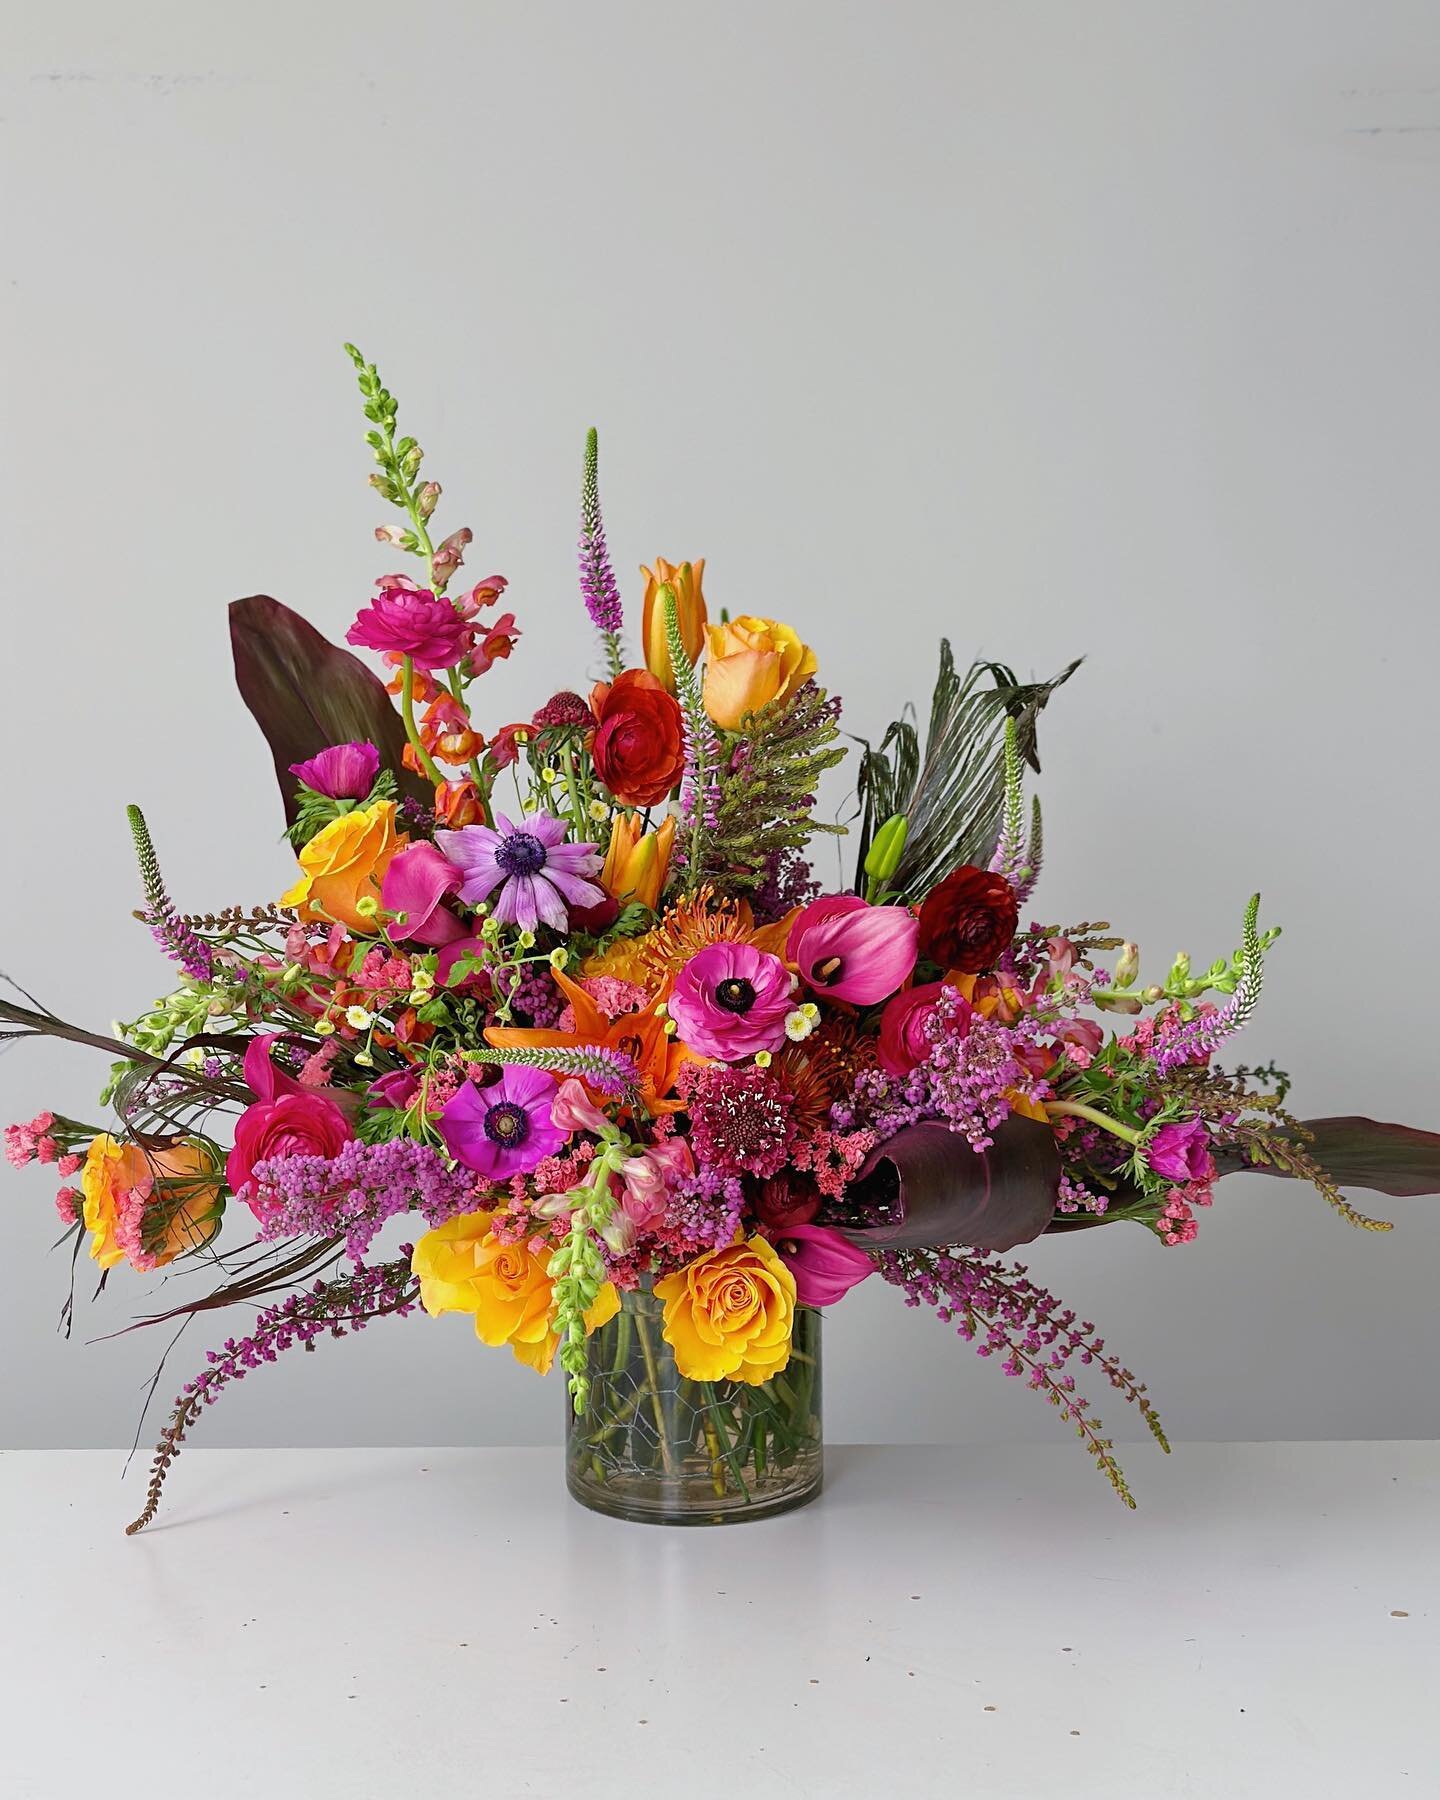 Monday mood: &ldquo;She loves sunsets above anything else.&rdquo; same. (Tycoon rose, lily, ranunculus, anemone, calla lily, pincushion, scabiosa, Veronica, snapdragon, statice, chamomile button, ti leaf, boronia) #irisblossomclt